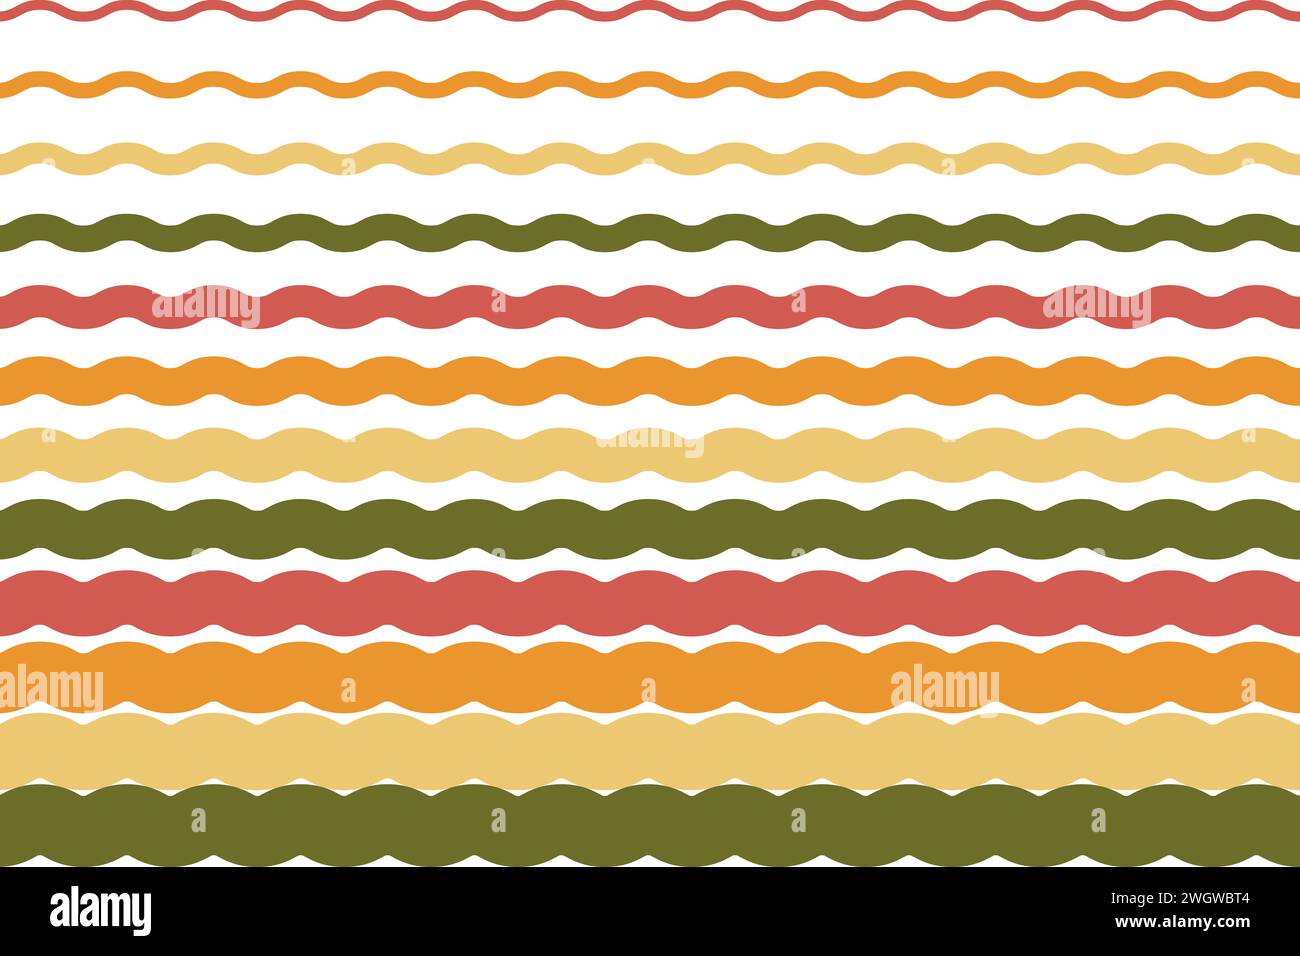 Horizontal colorful striped design. Seamless wavy retro pattern in 60s-70s style. Vintage wallpaper with striped wave texture.Vector illustration. Stock Vector